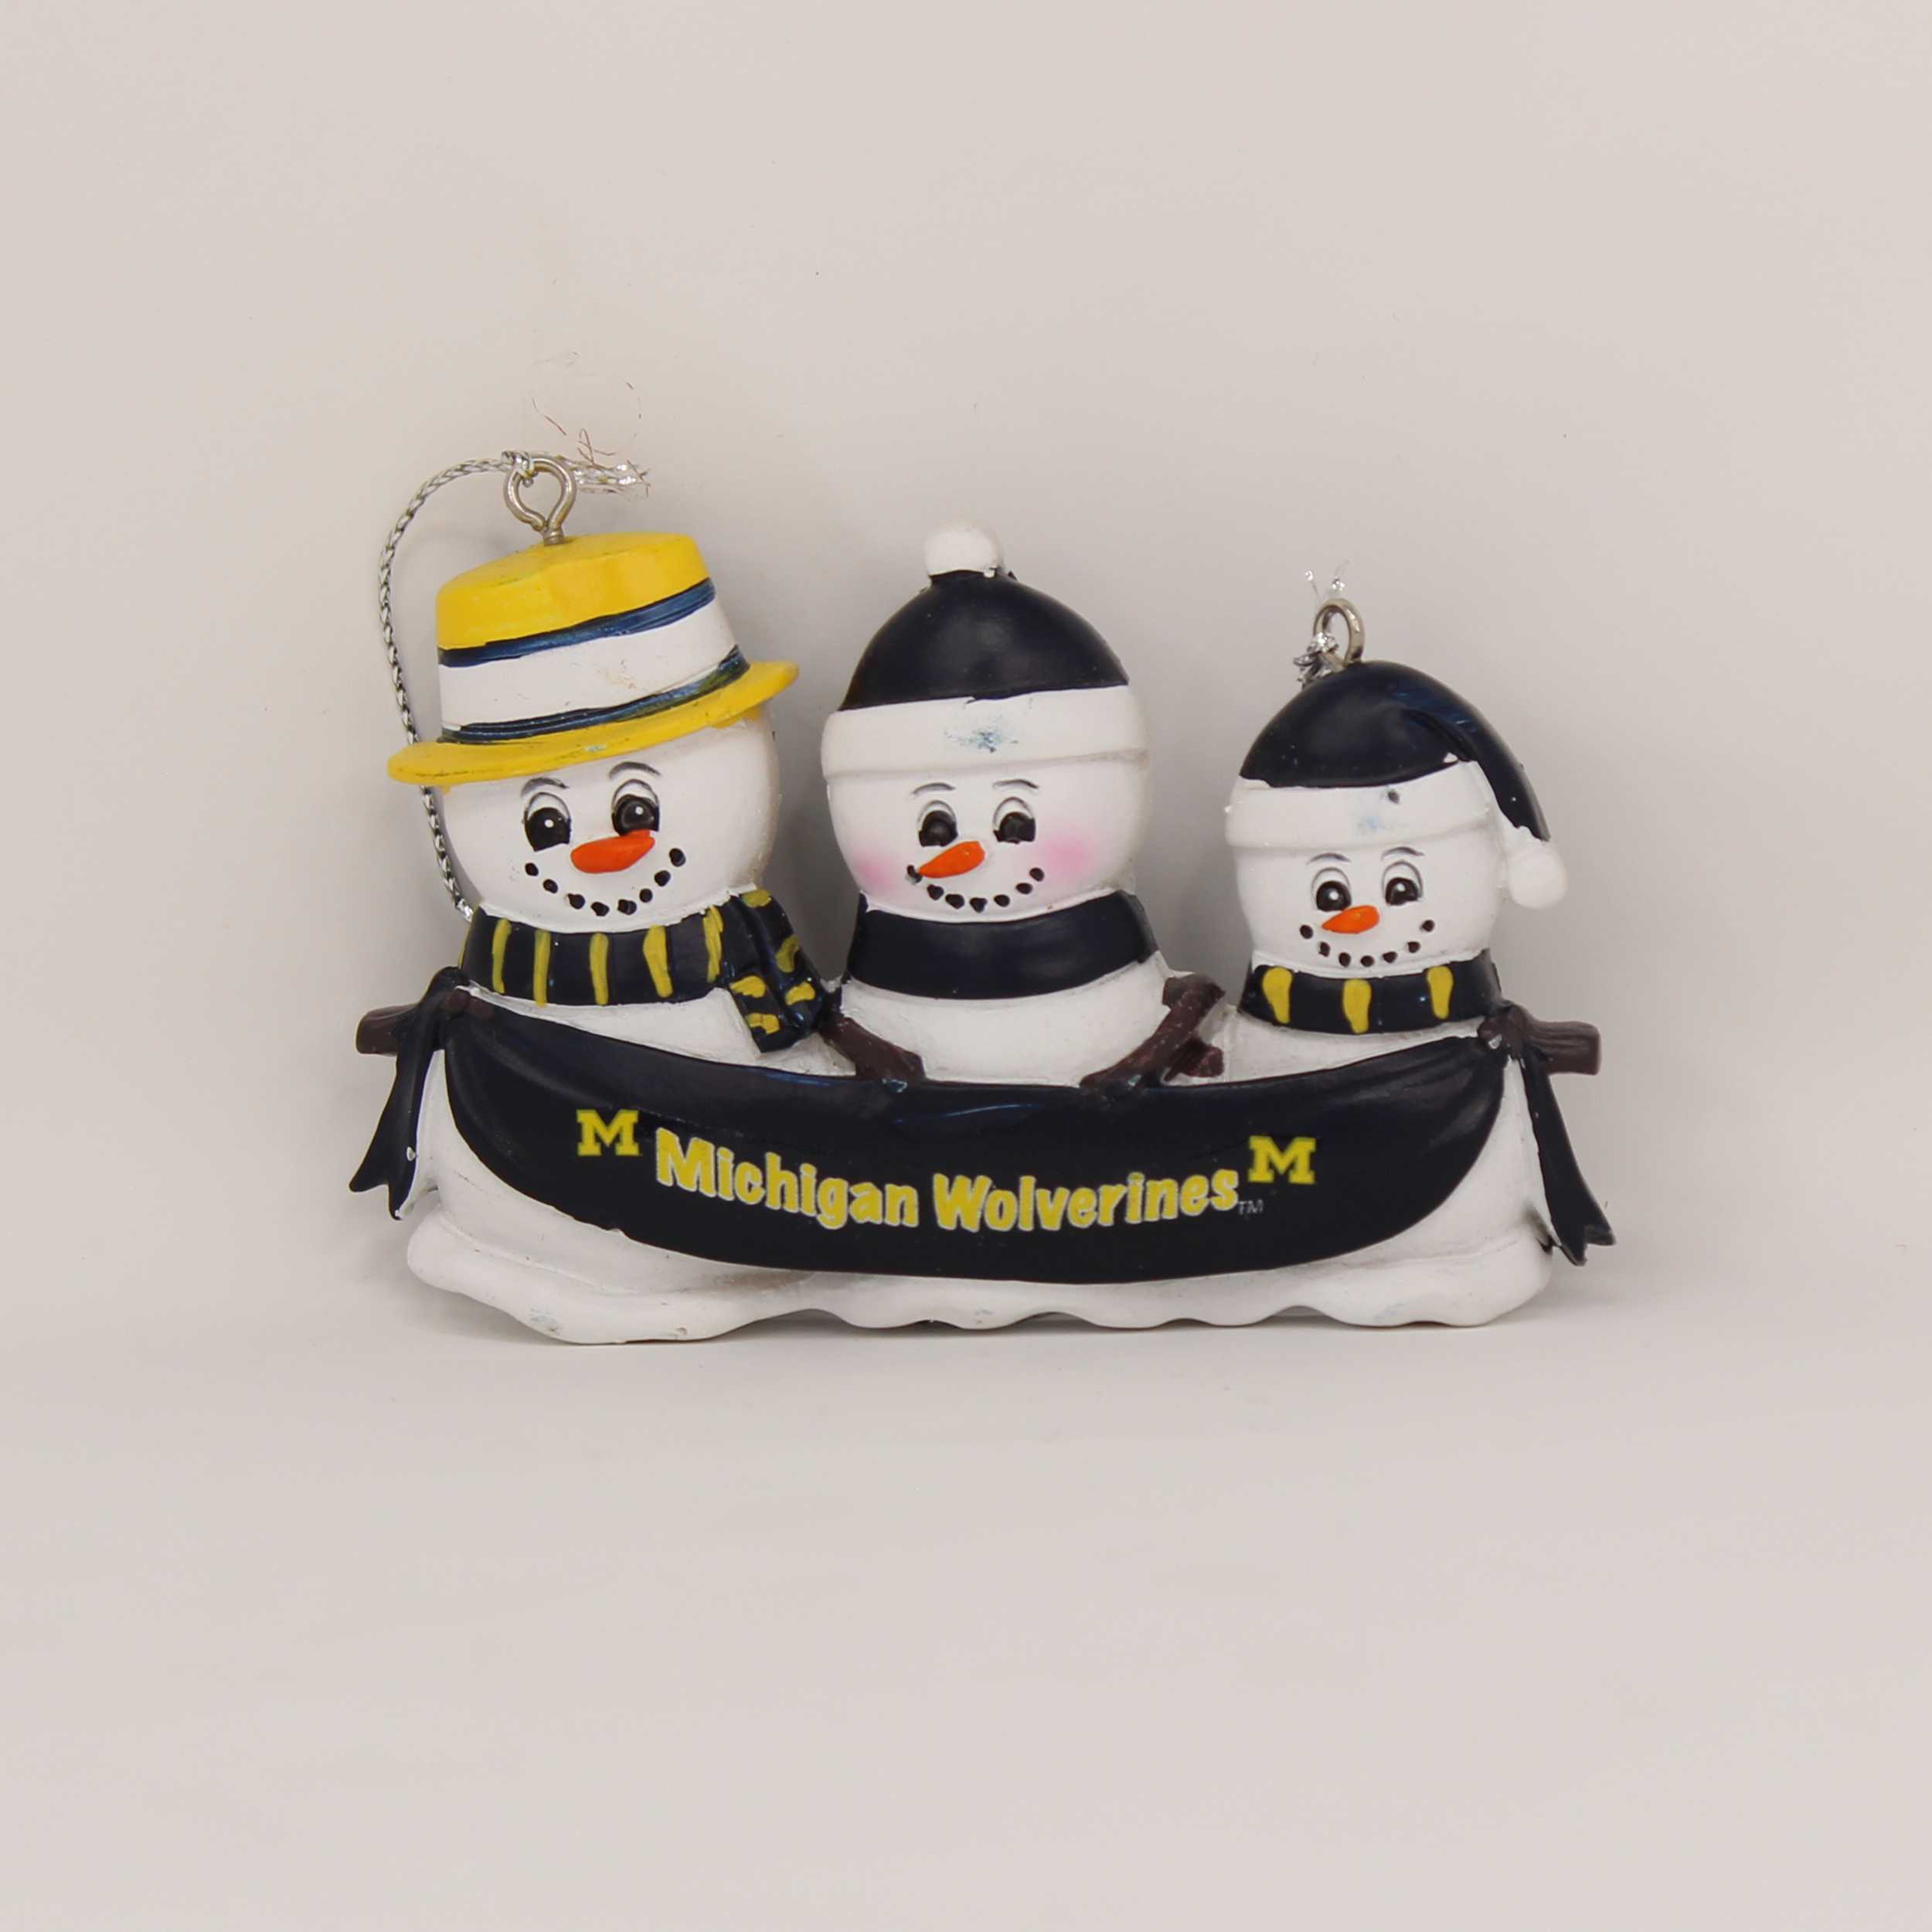 Personalized Family Ornament Michigan Wolverines